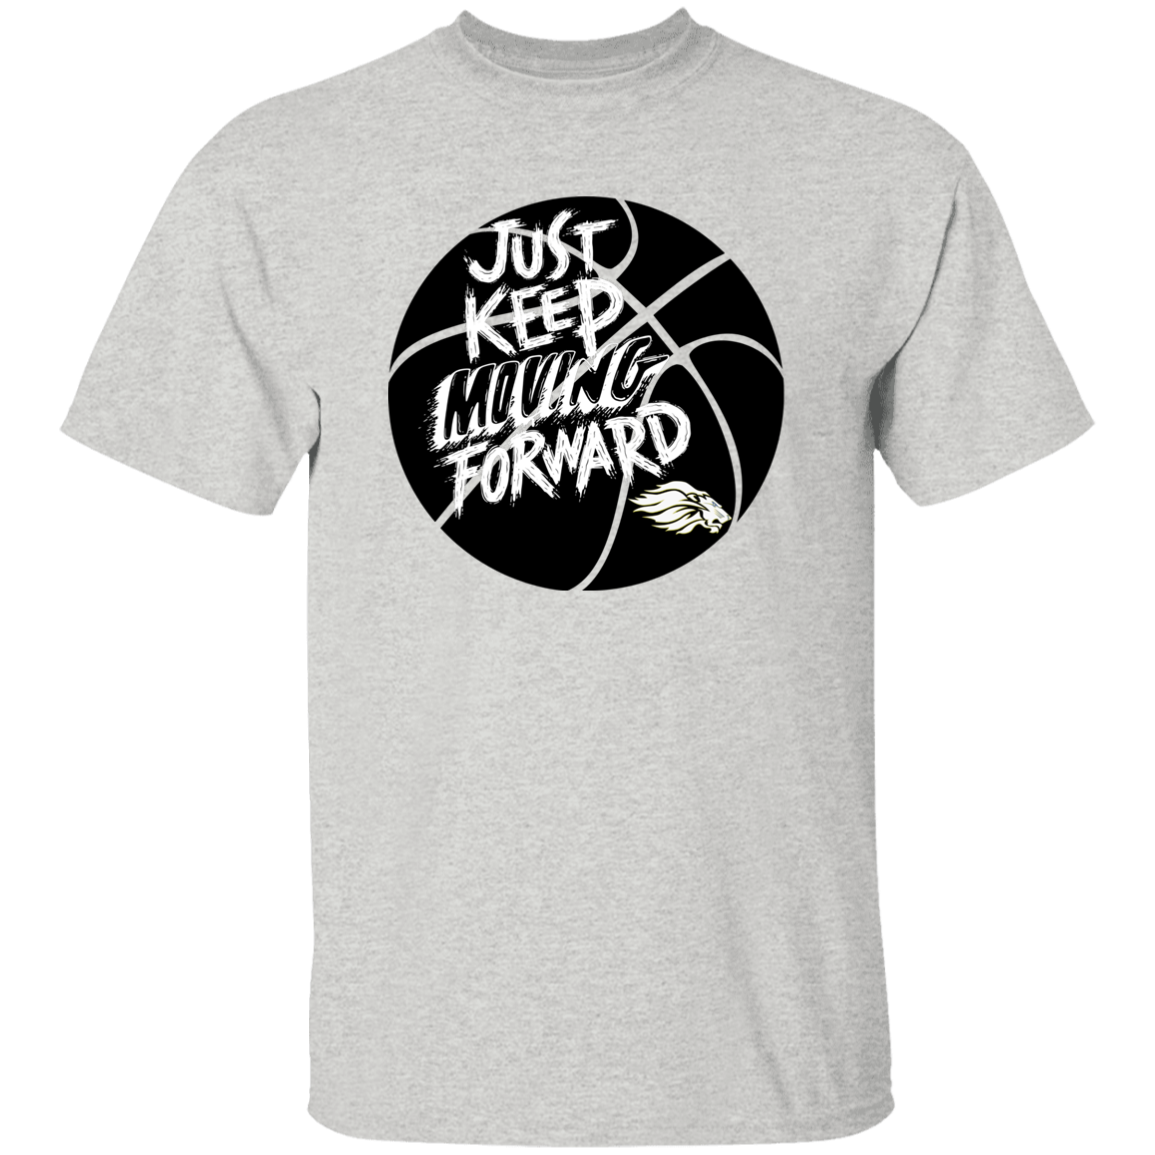 Just Keep Moving Forward- Youth 5.3 oz 100% Cotton T-Shirt